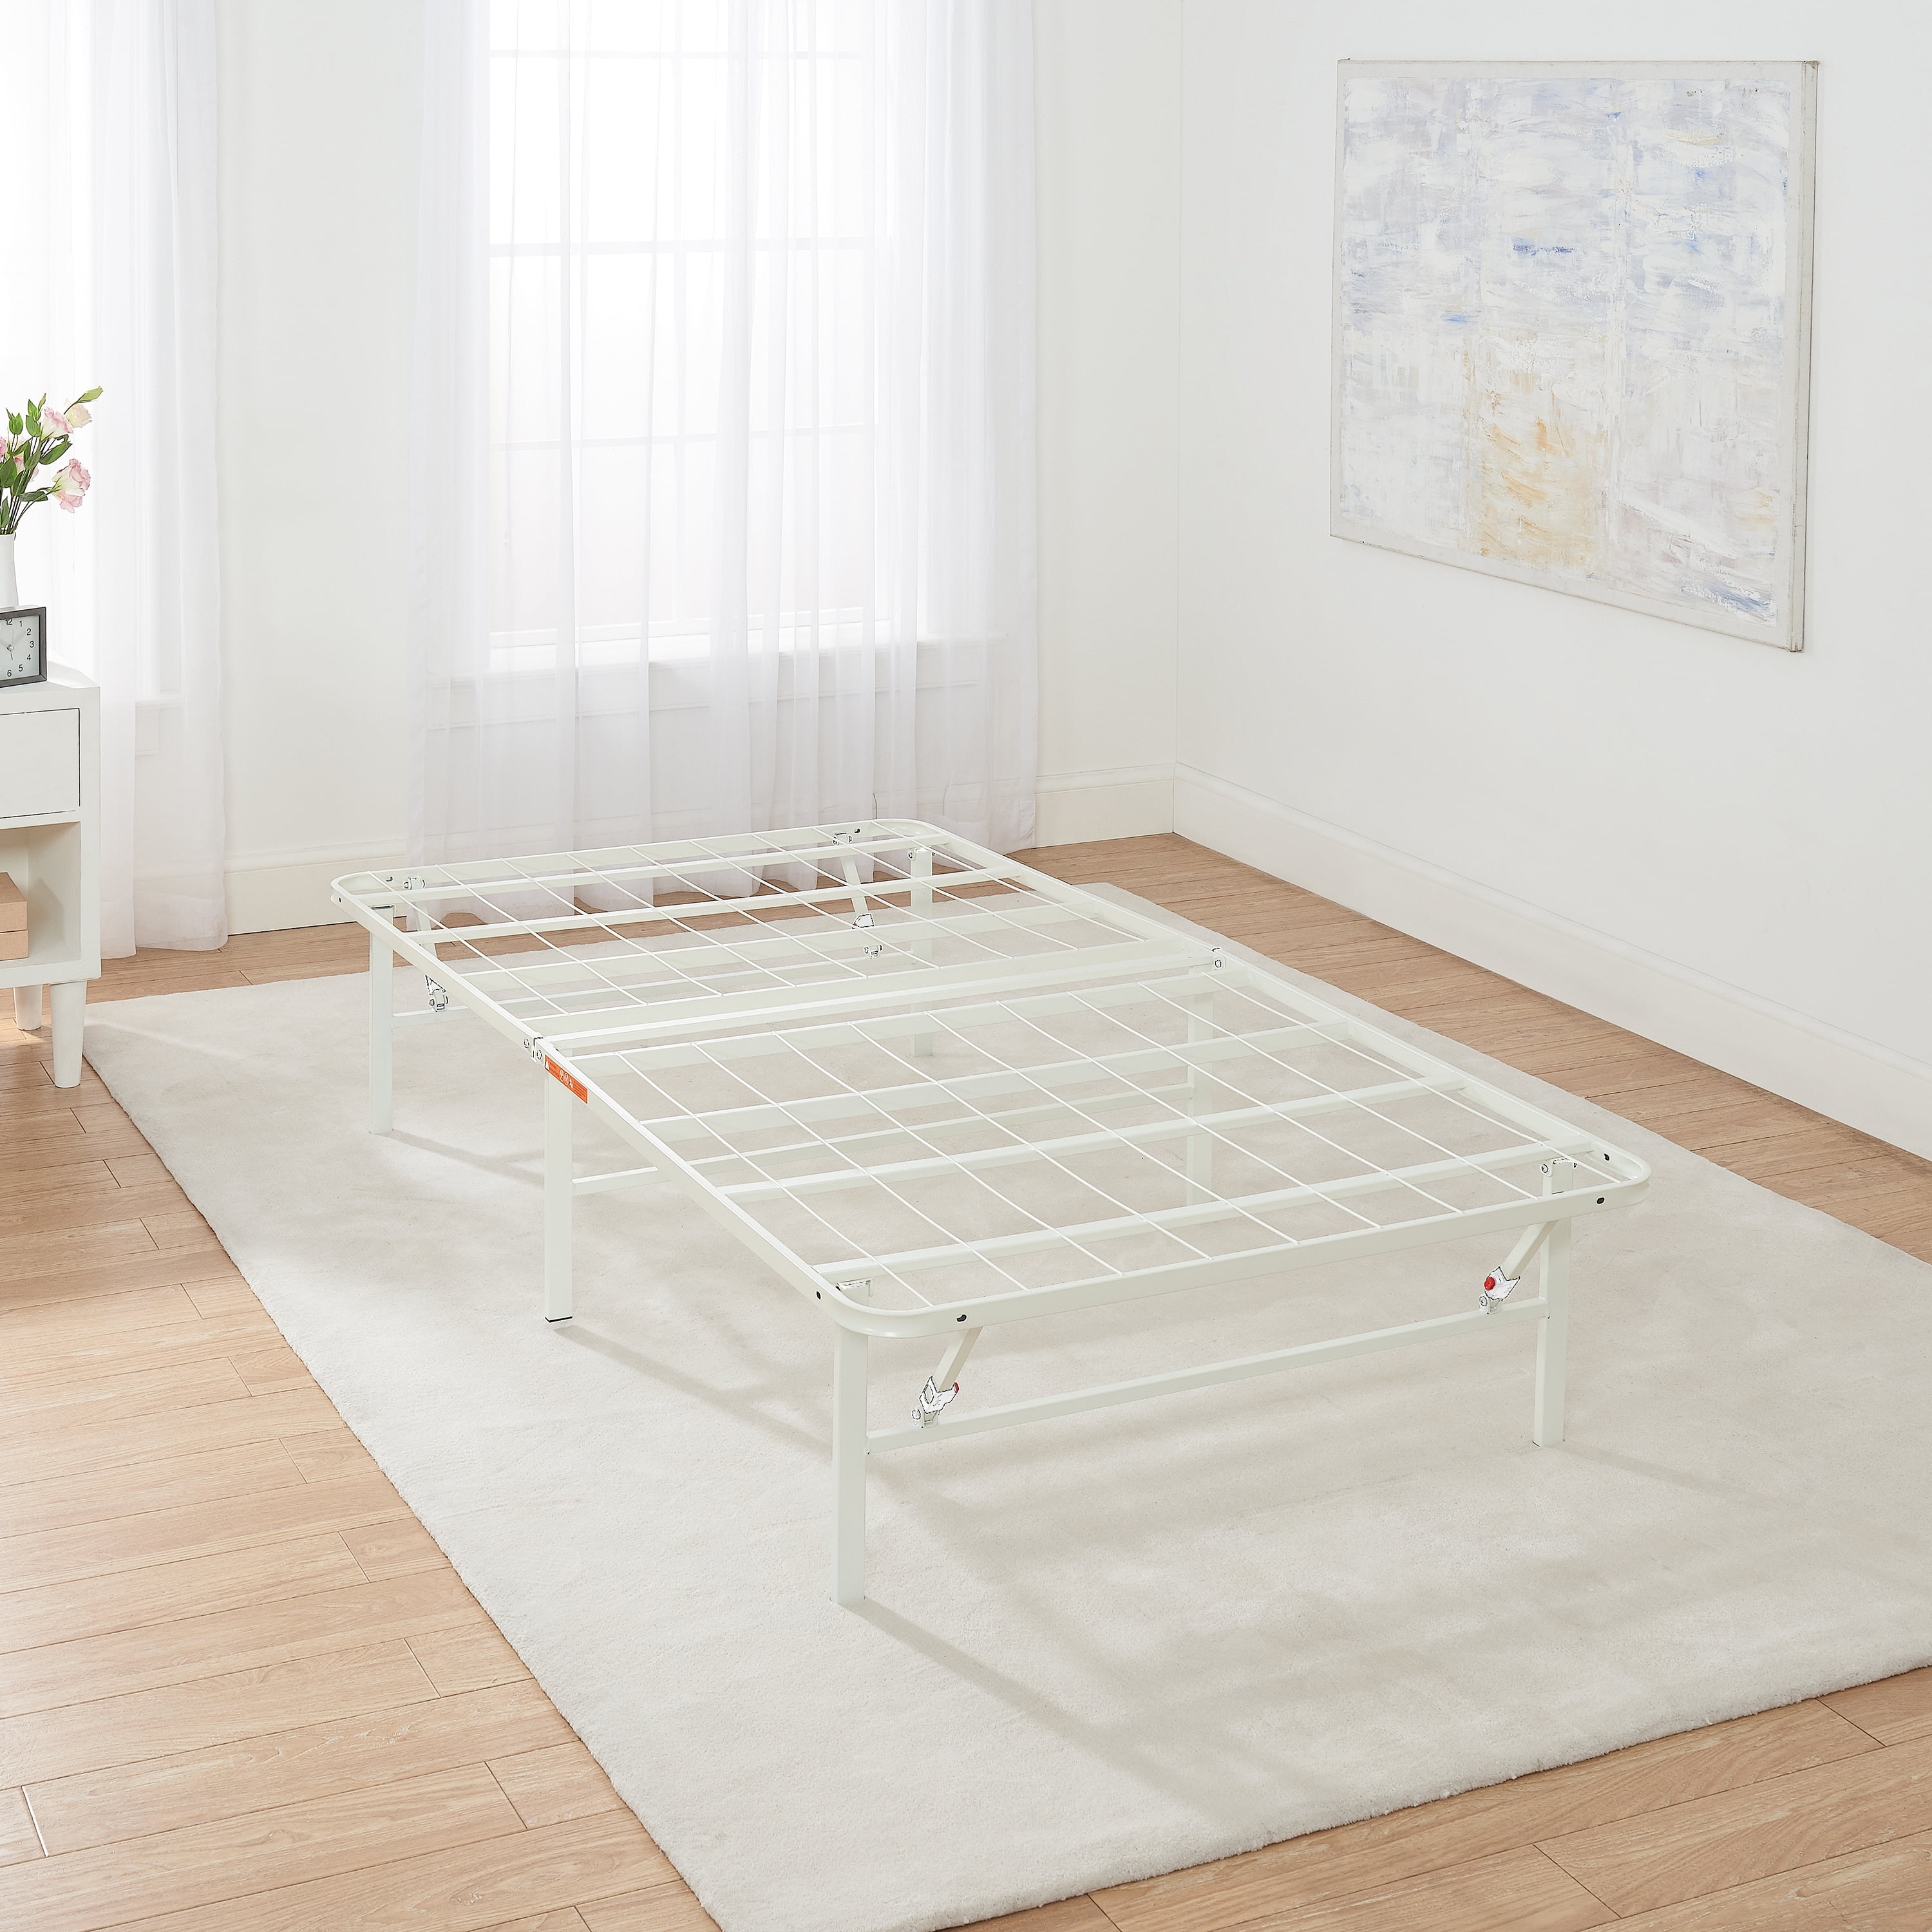 Mainstays 14 High Profile Foldable White Steel Bed Frame Twin XL Queen Cal King 